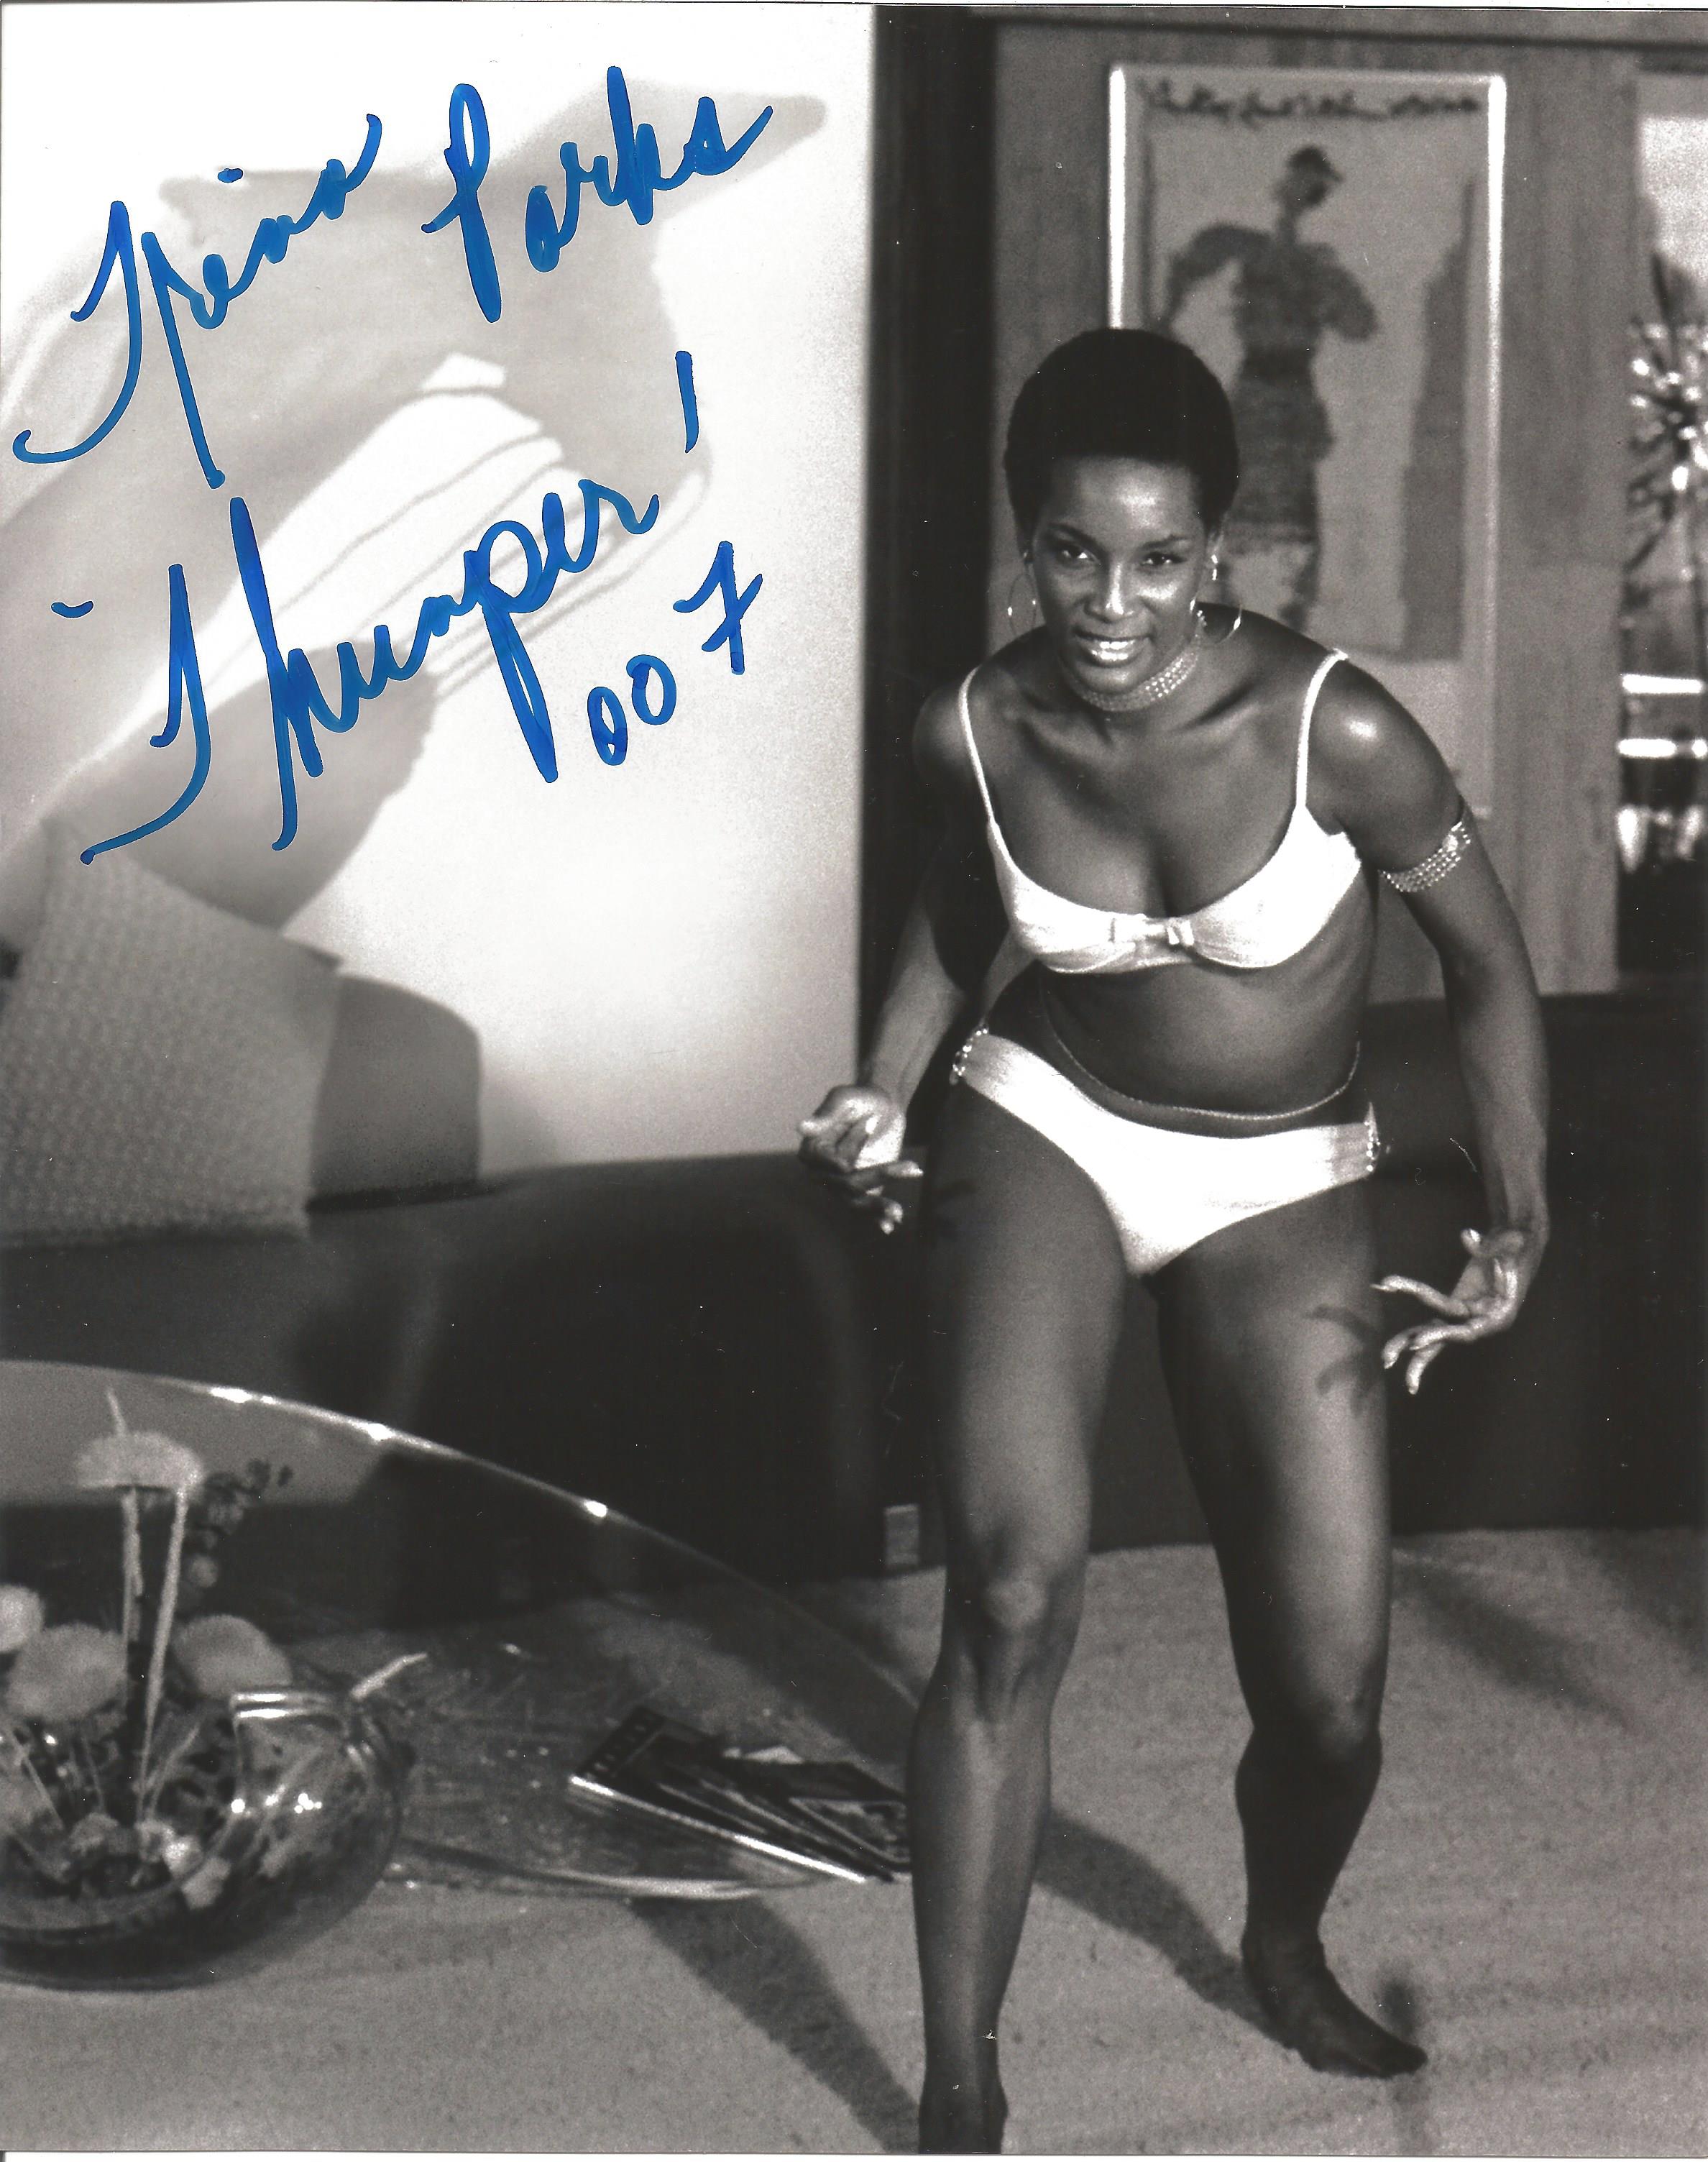 Trina Parks Thumper Handsigned 10x8 Black and White Photo from the James Bond Film Diamonds are